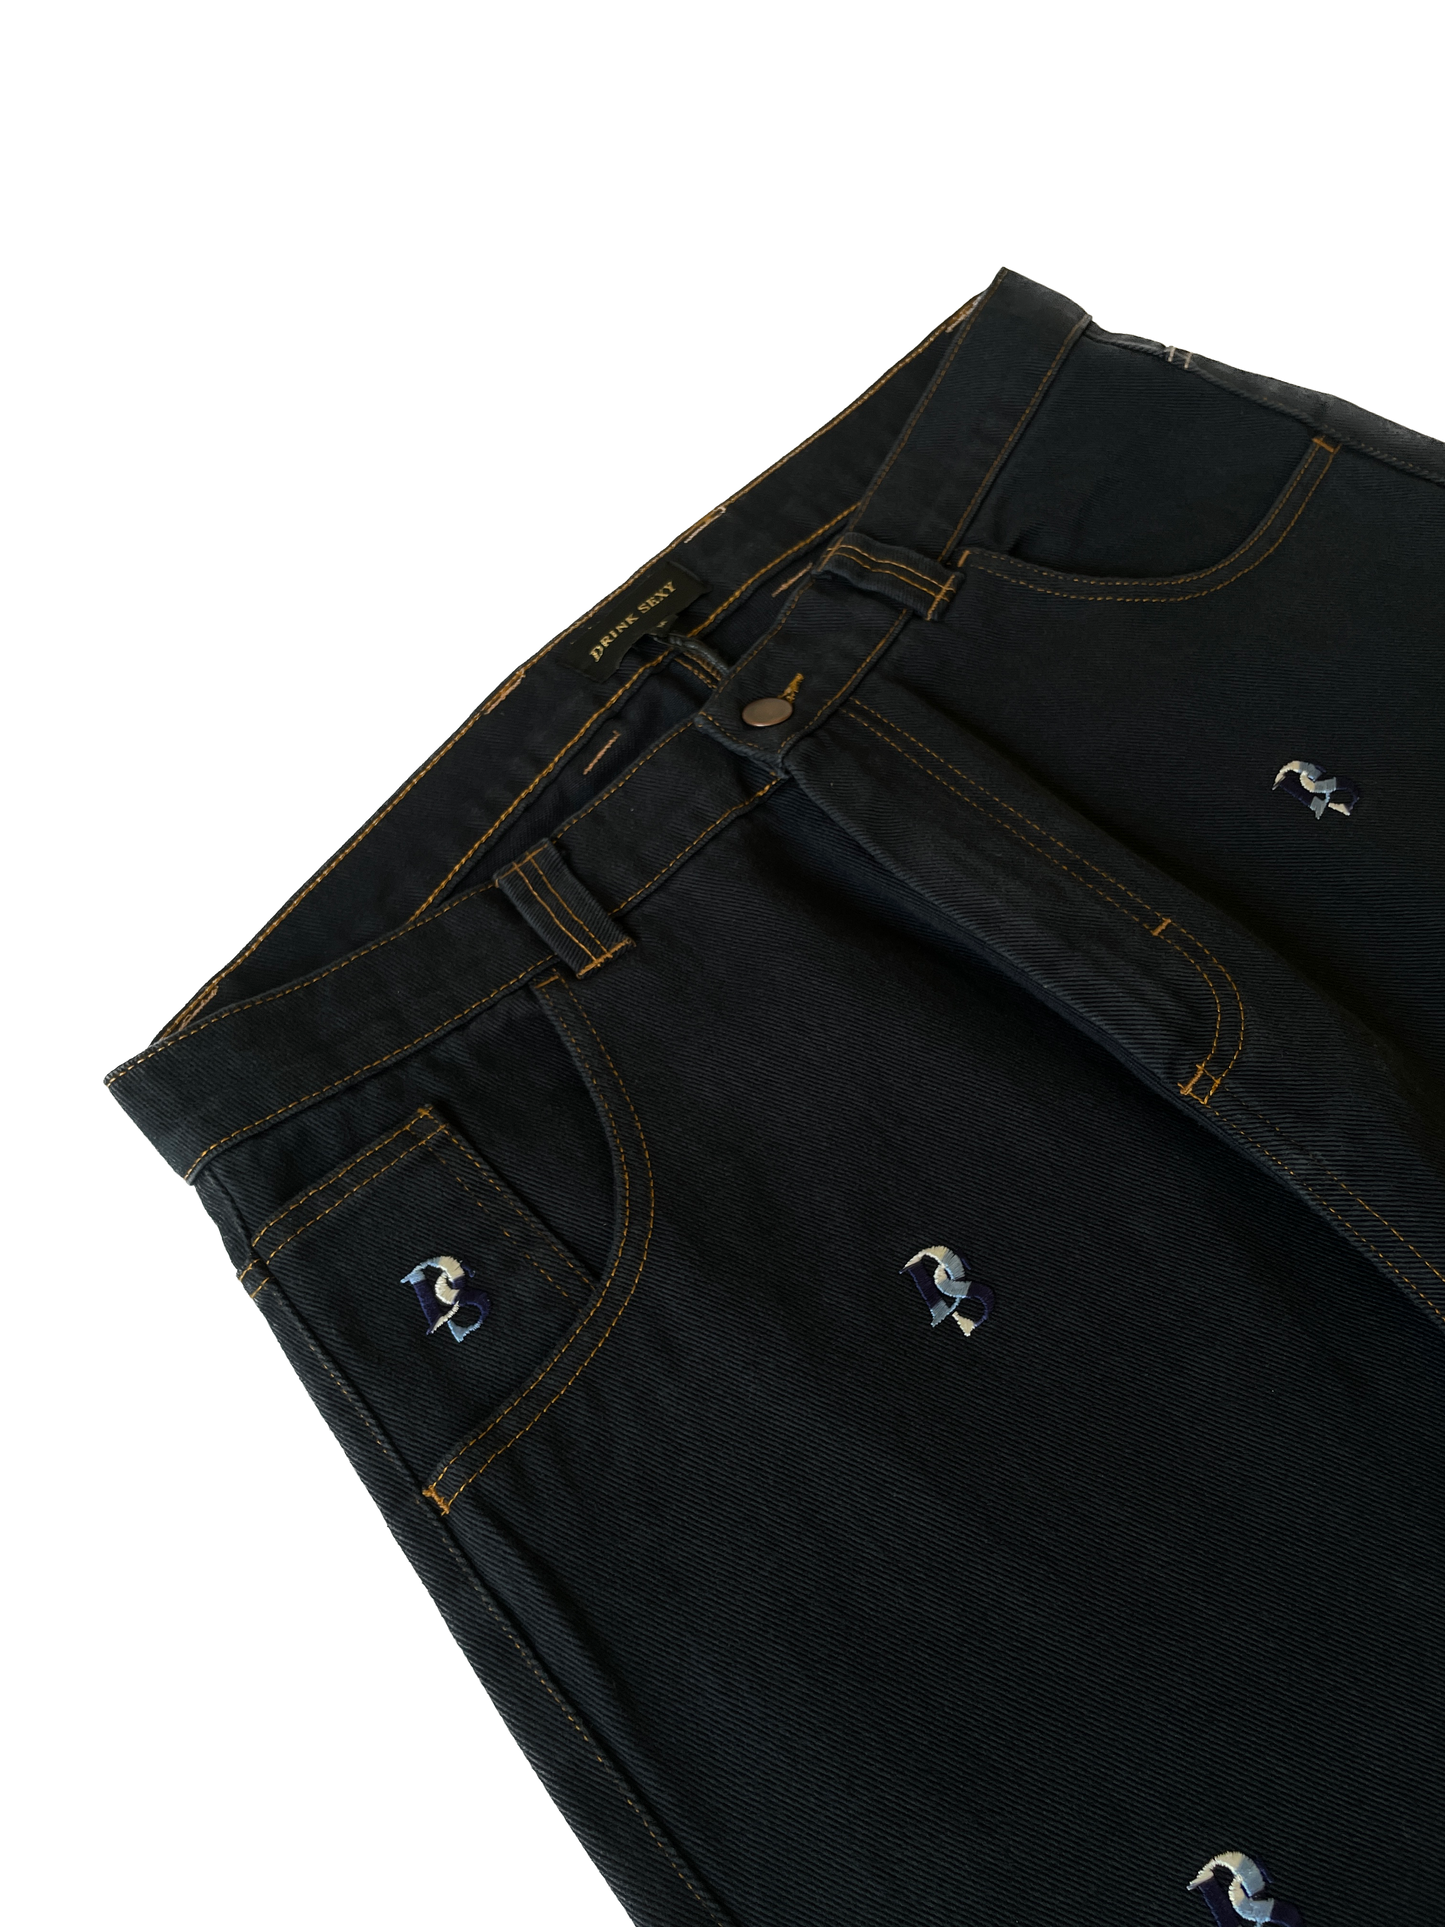 Navy Jeans Pant